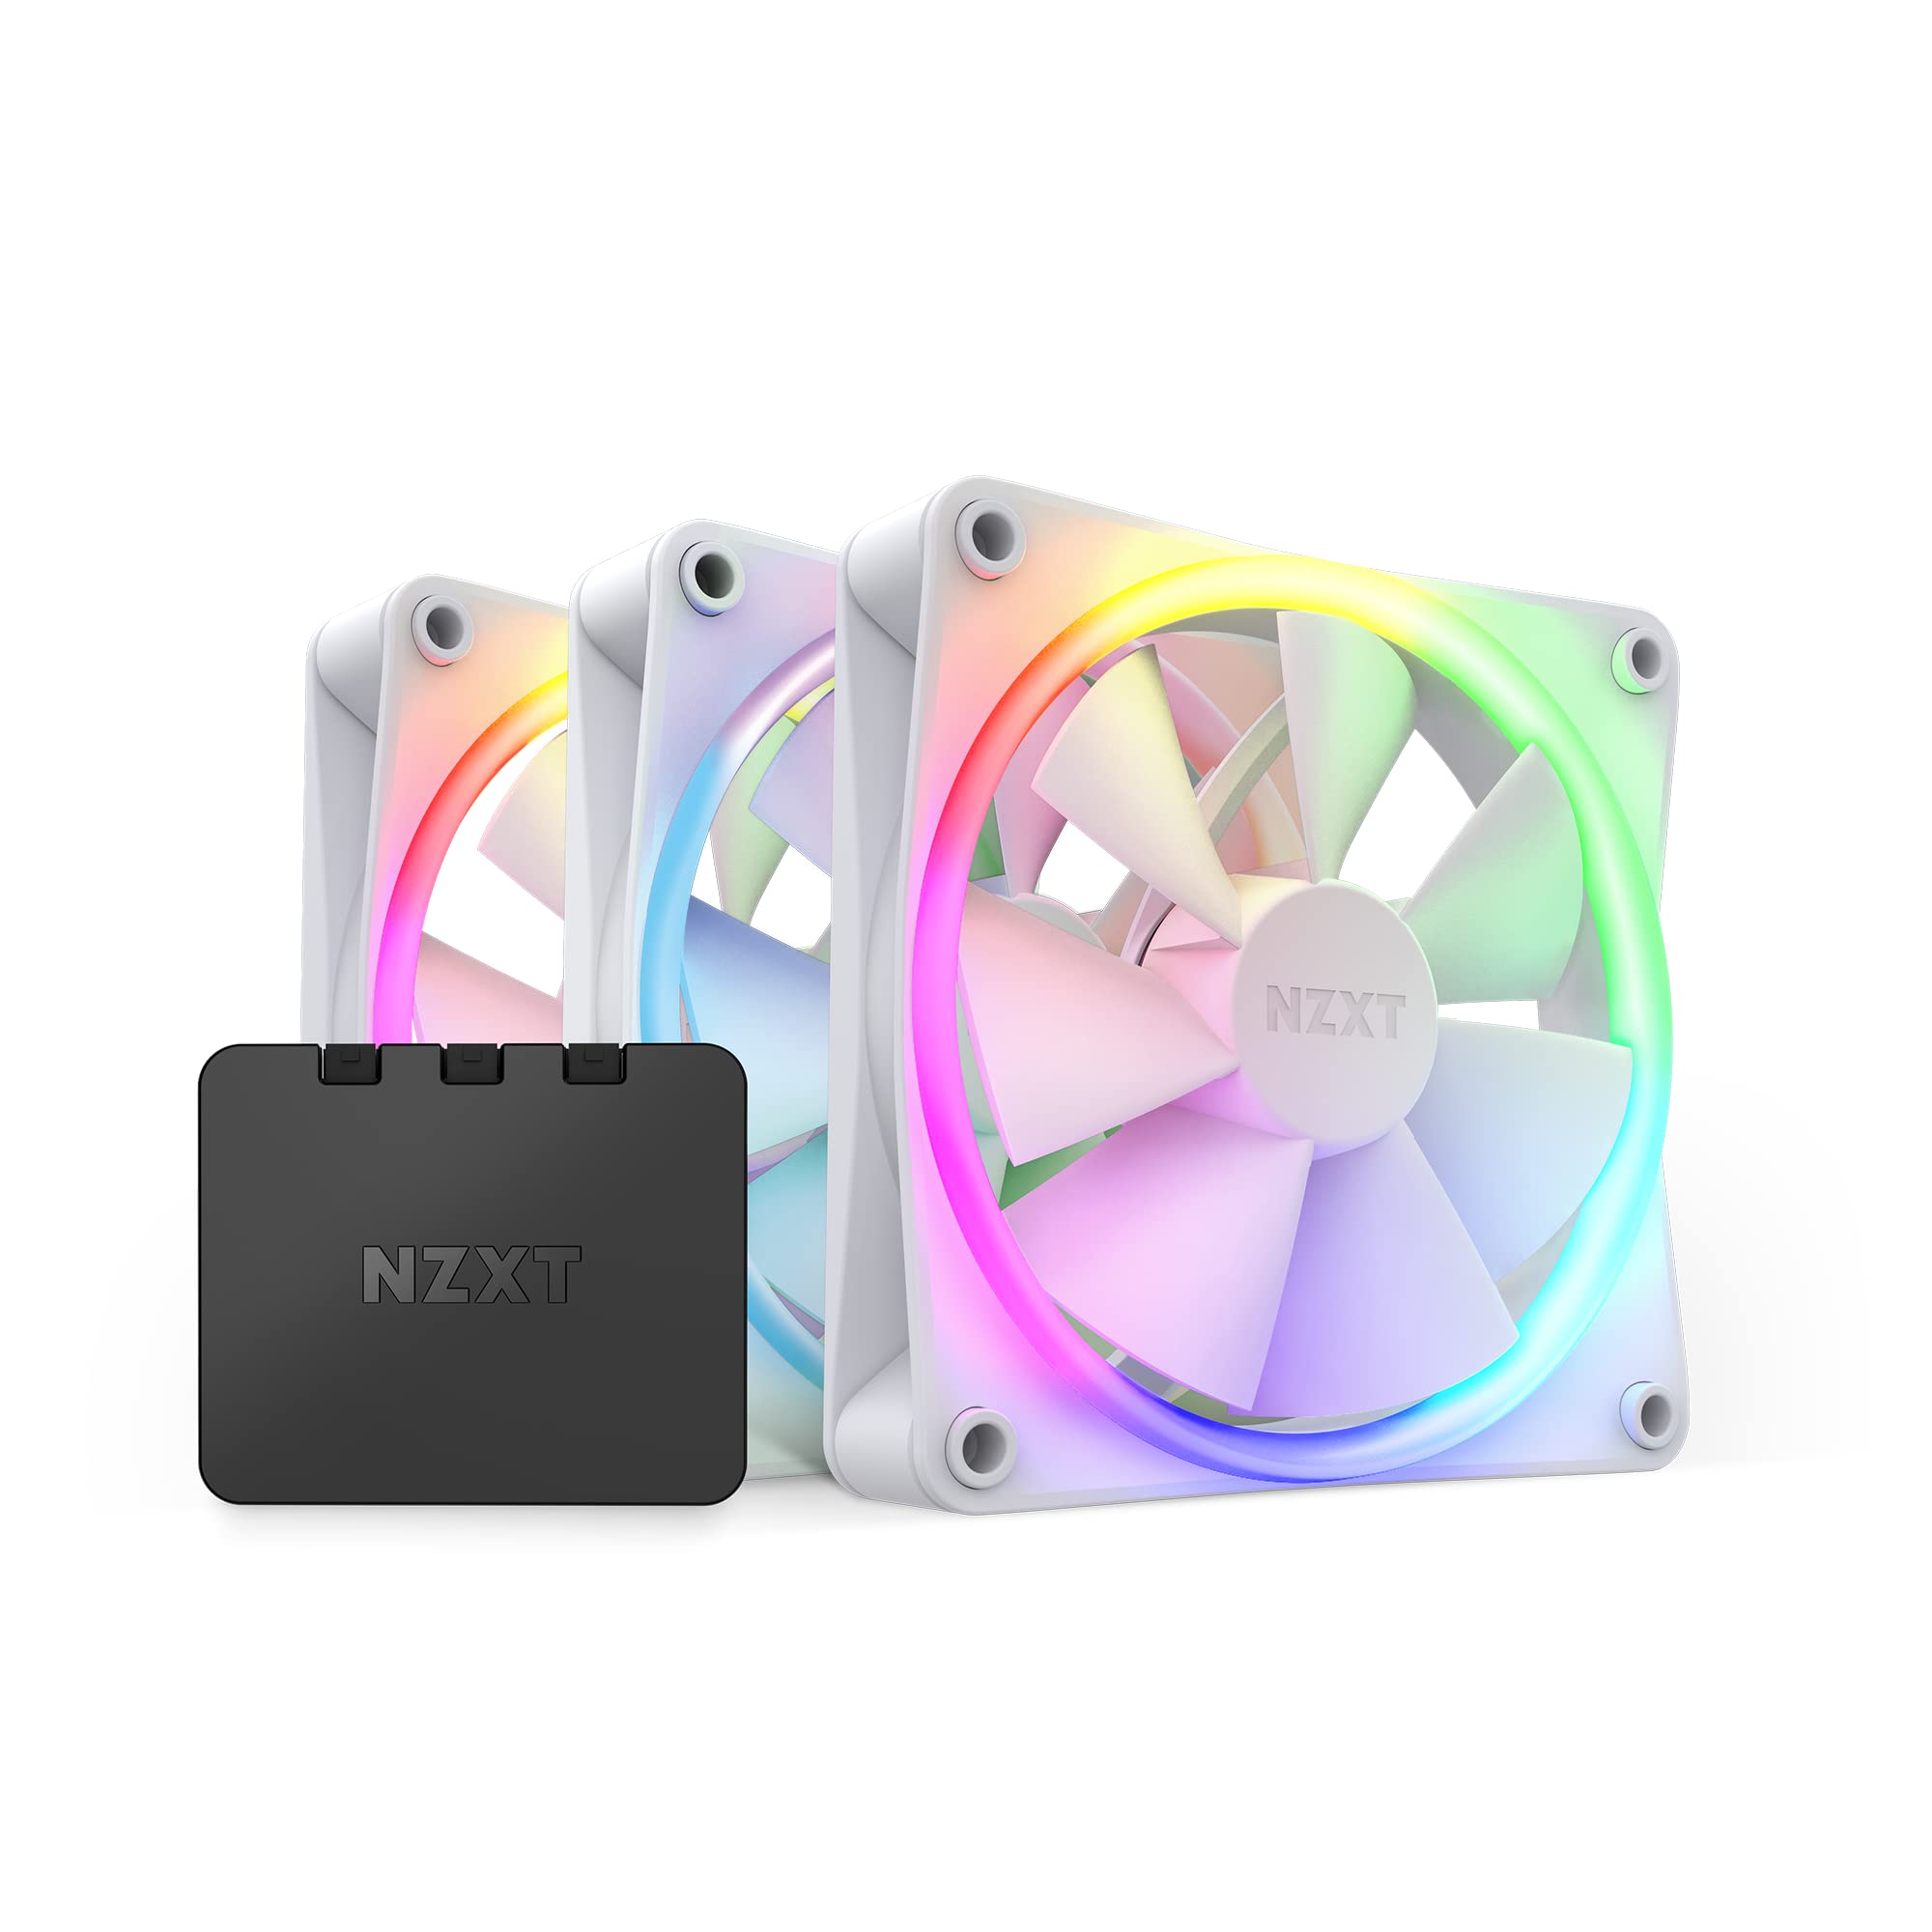 NZXT-RFR12TFW1